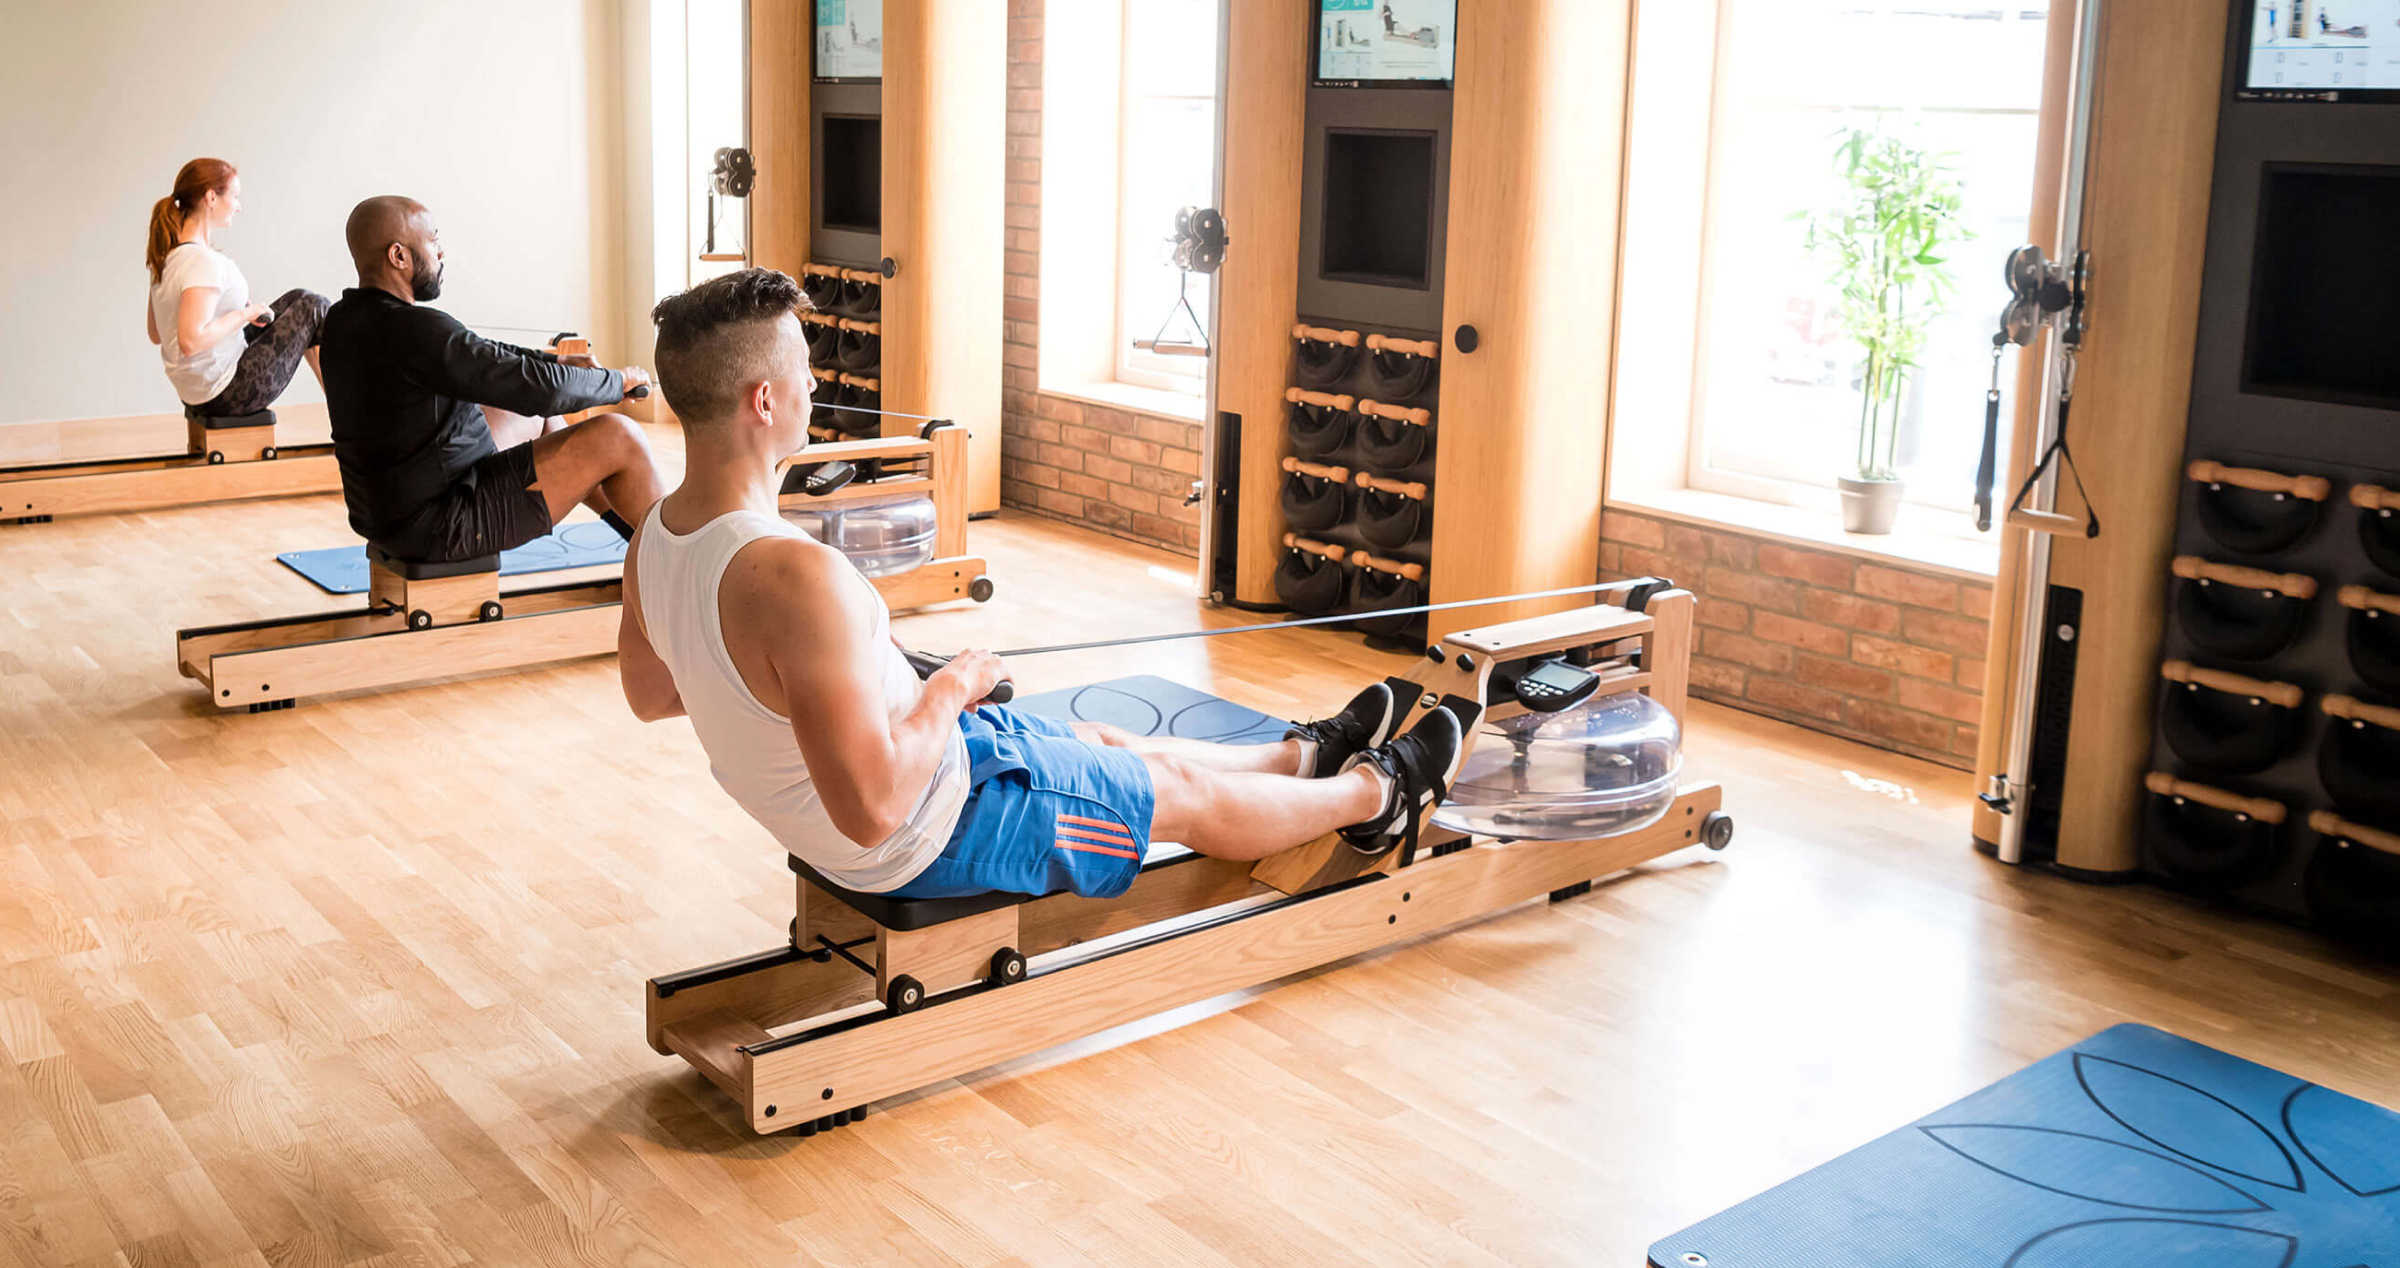 Lose weight in Tunbridge Wells with our cutting-edge Personal Training Studios. Exercise using elegant water rowers and bikes under guidance of a video instructor.